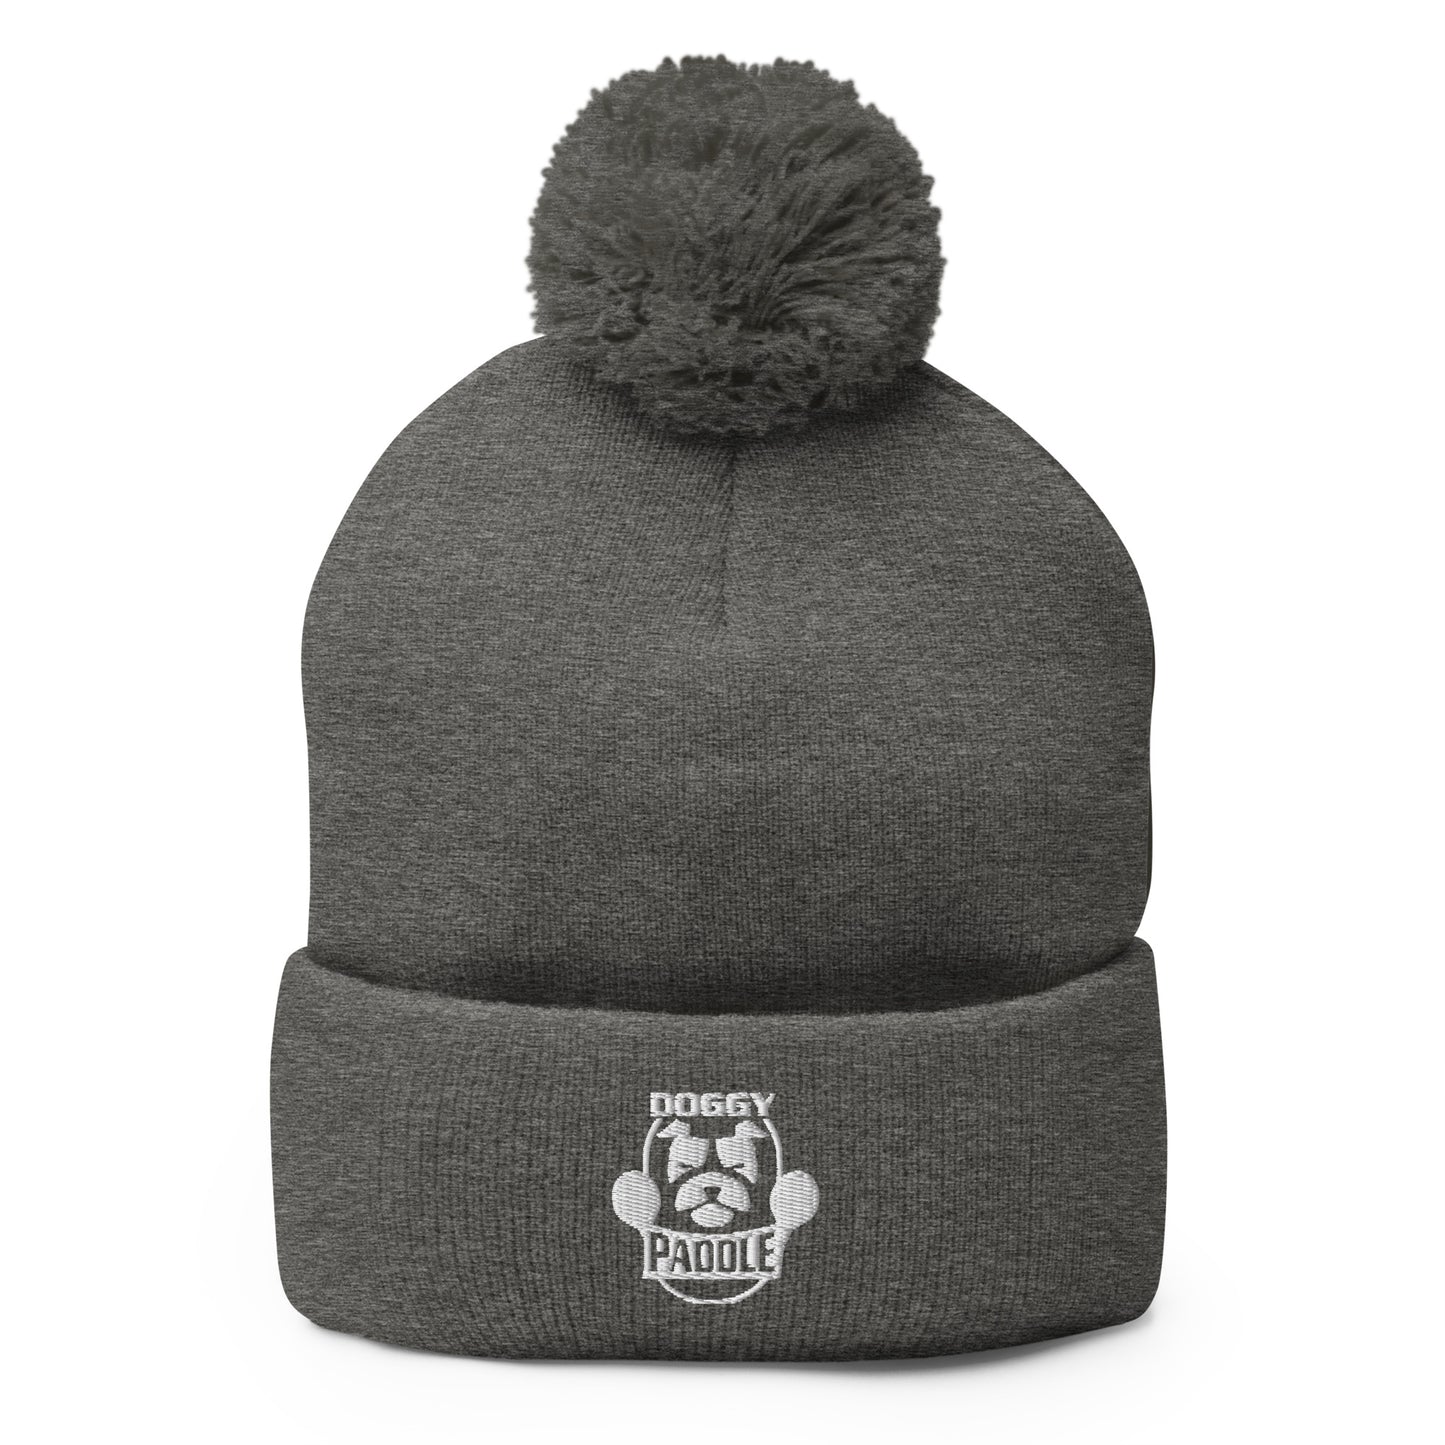 Doggy Paddle Classic Beanie